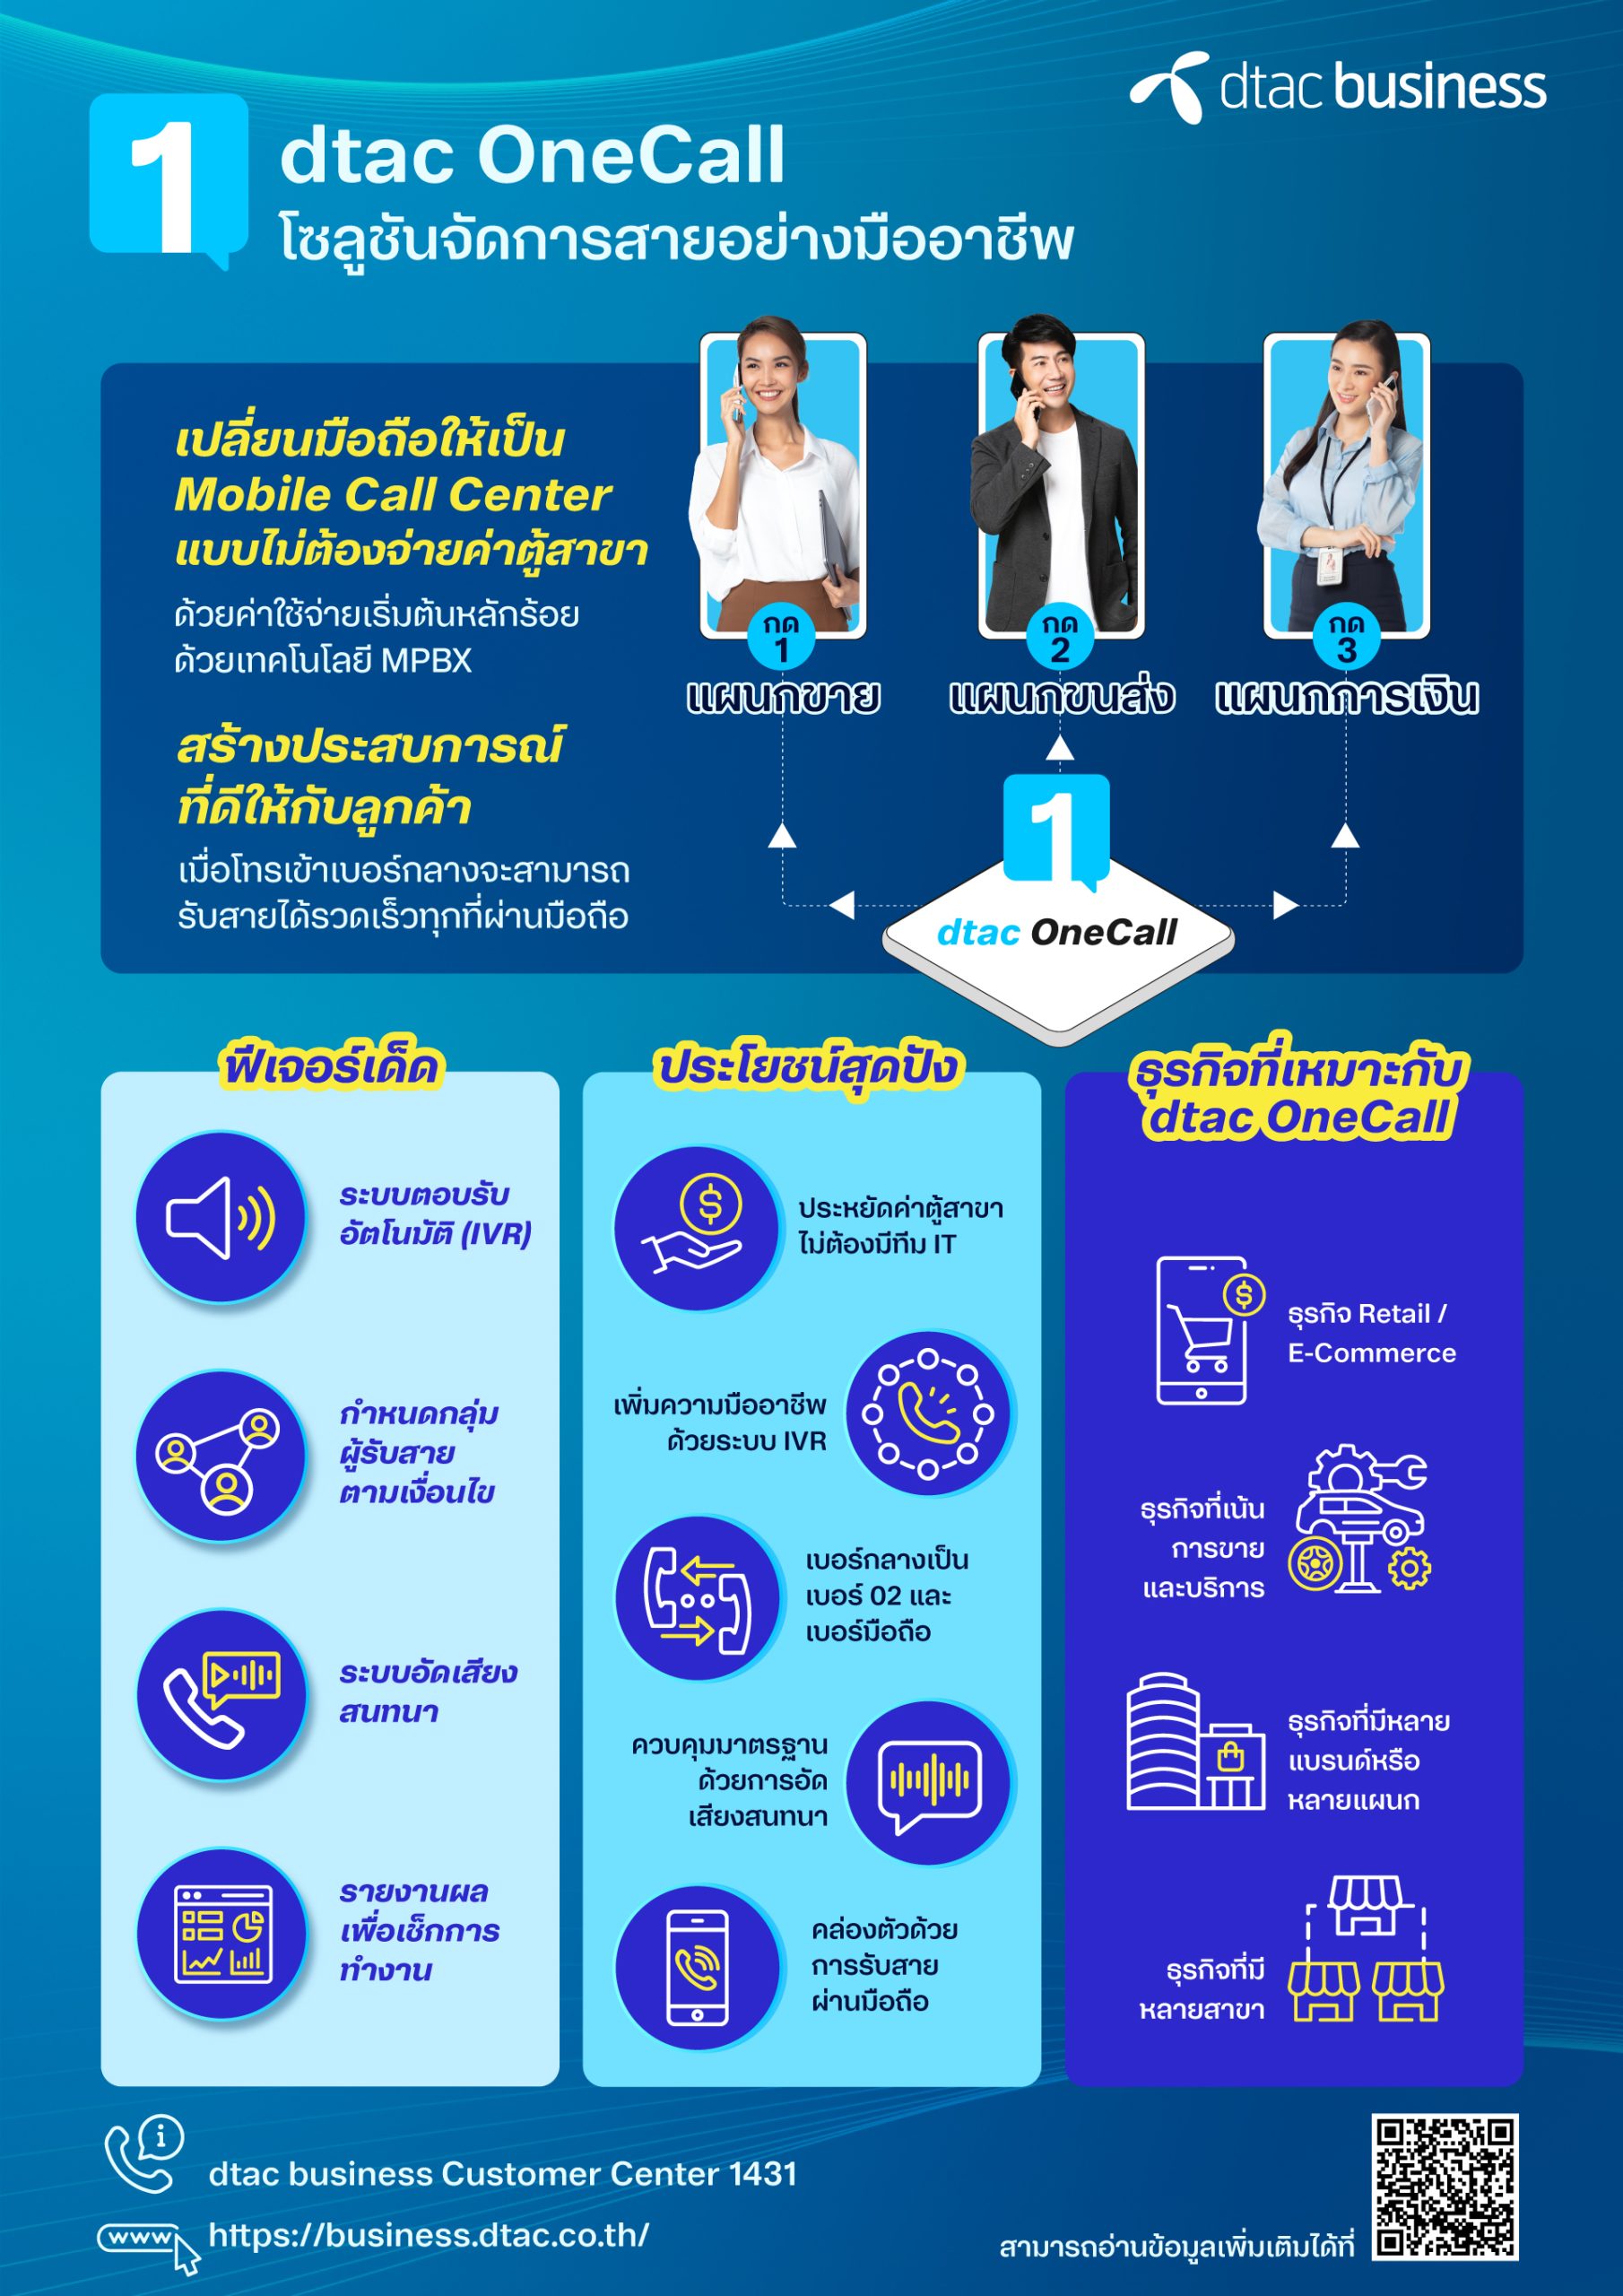 dtac-business_OneCall_Infographic-scaled.jpg